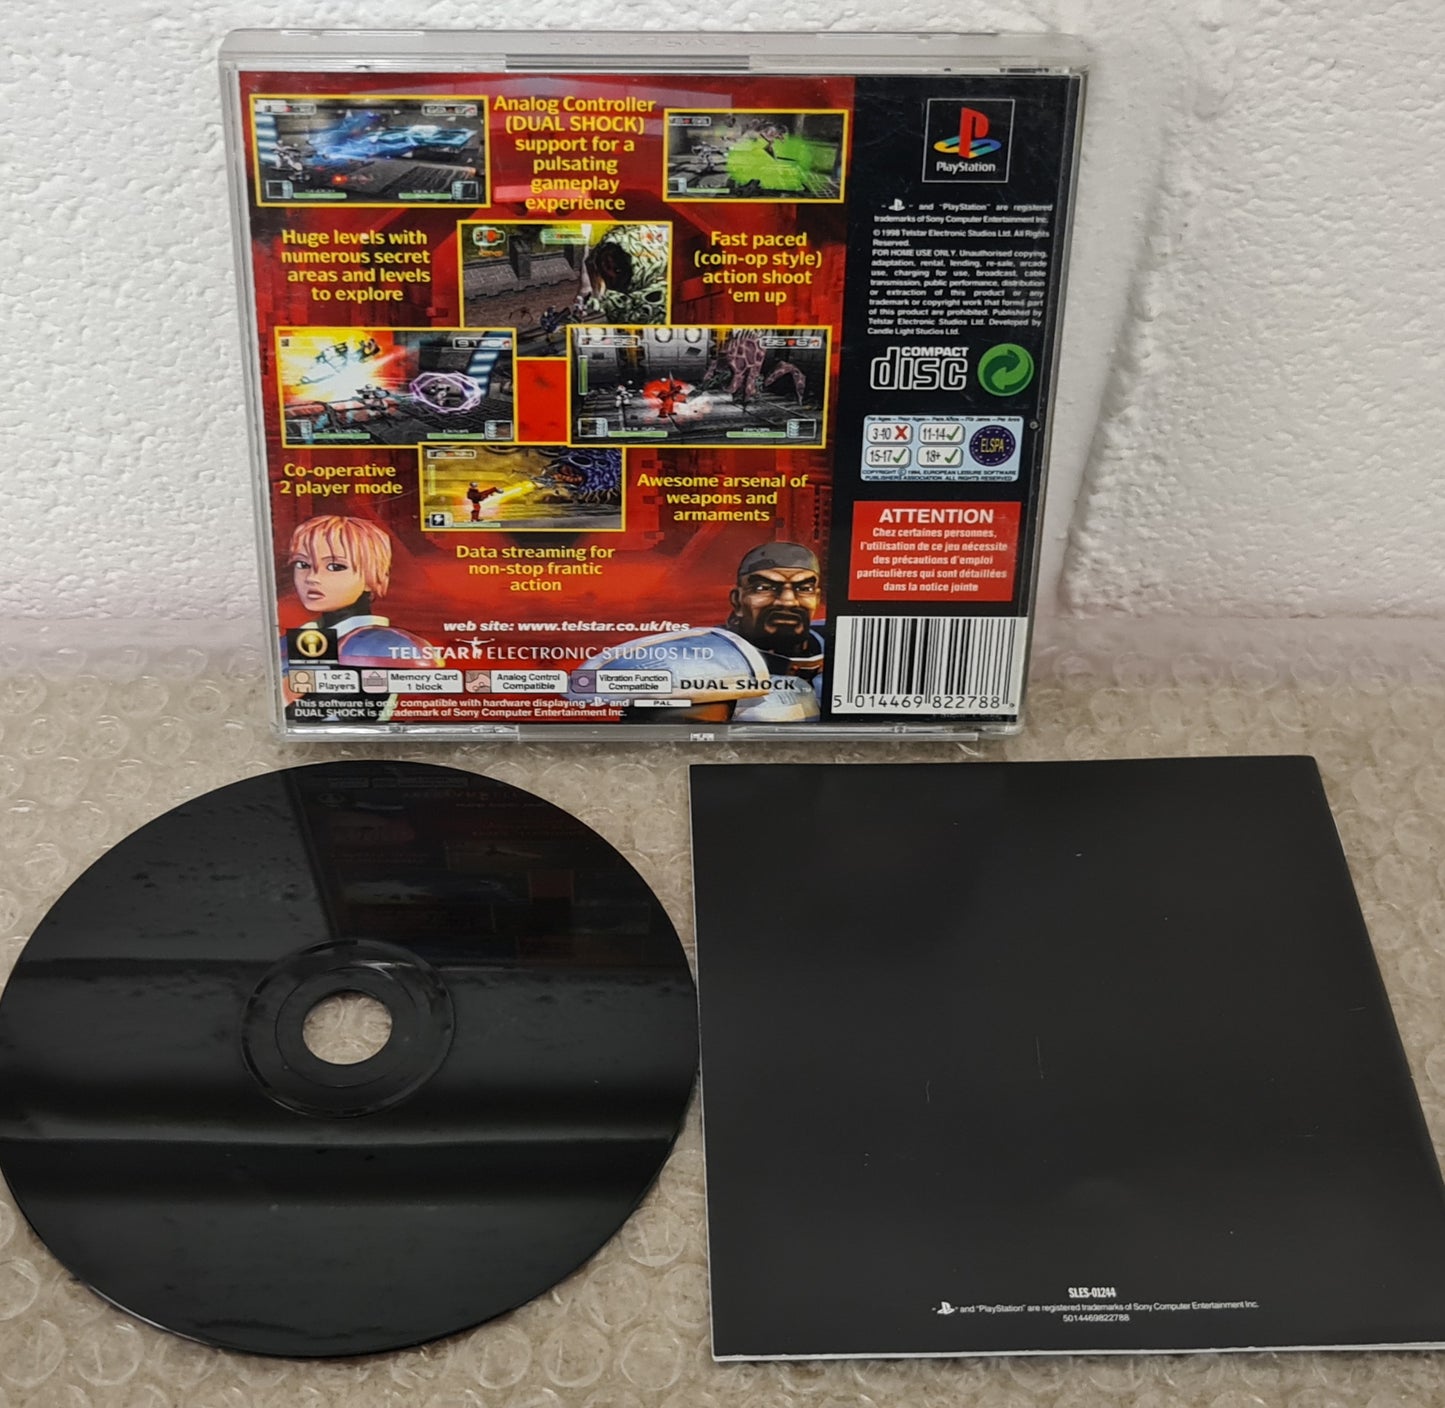 Assault Sony Playstation 1 (PS1) Game